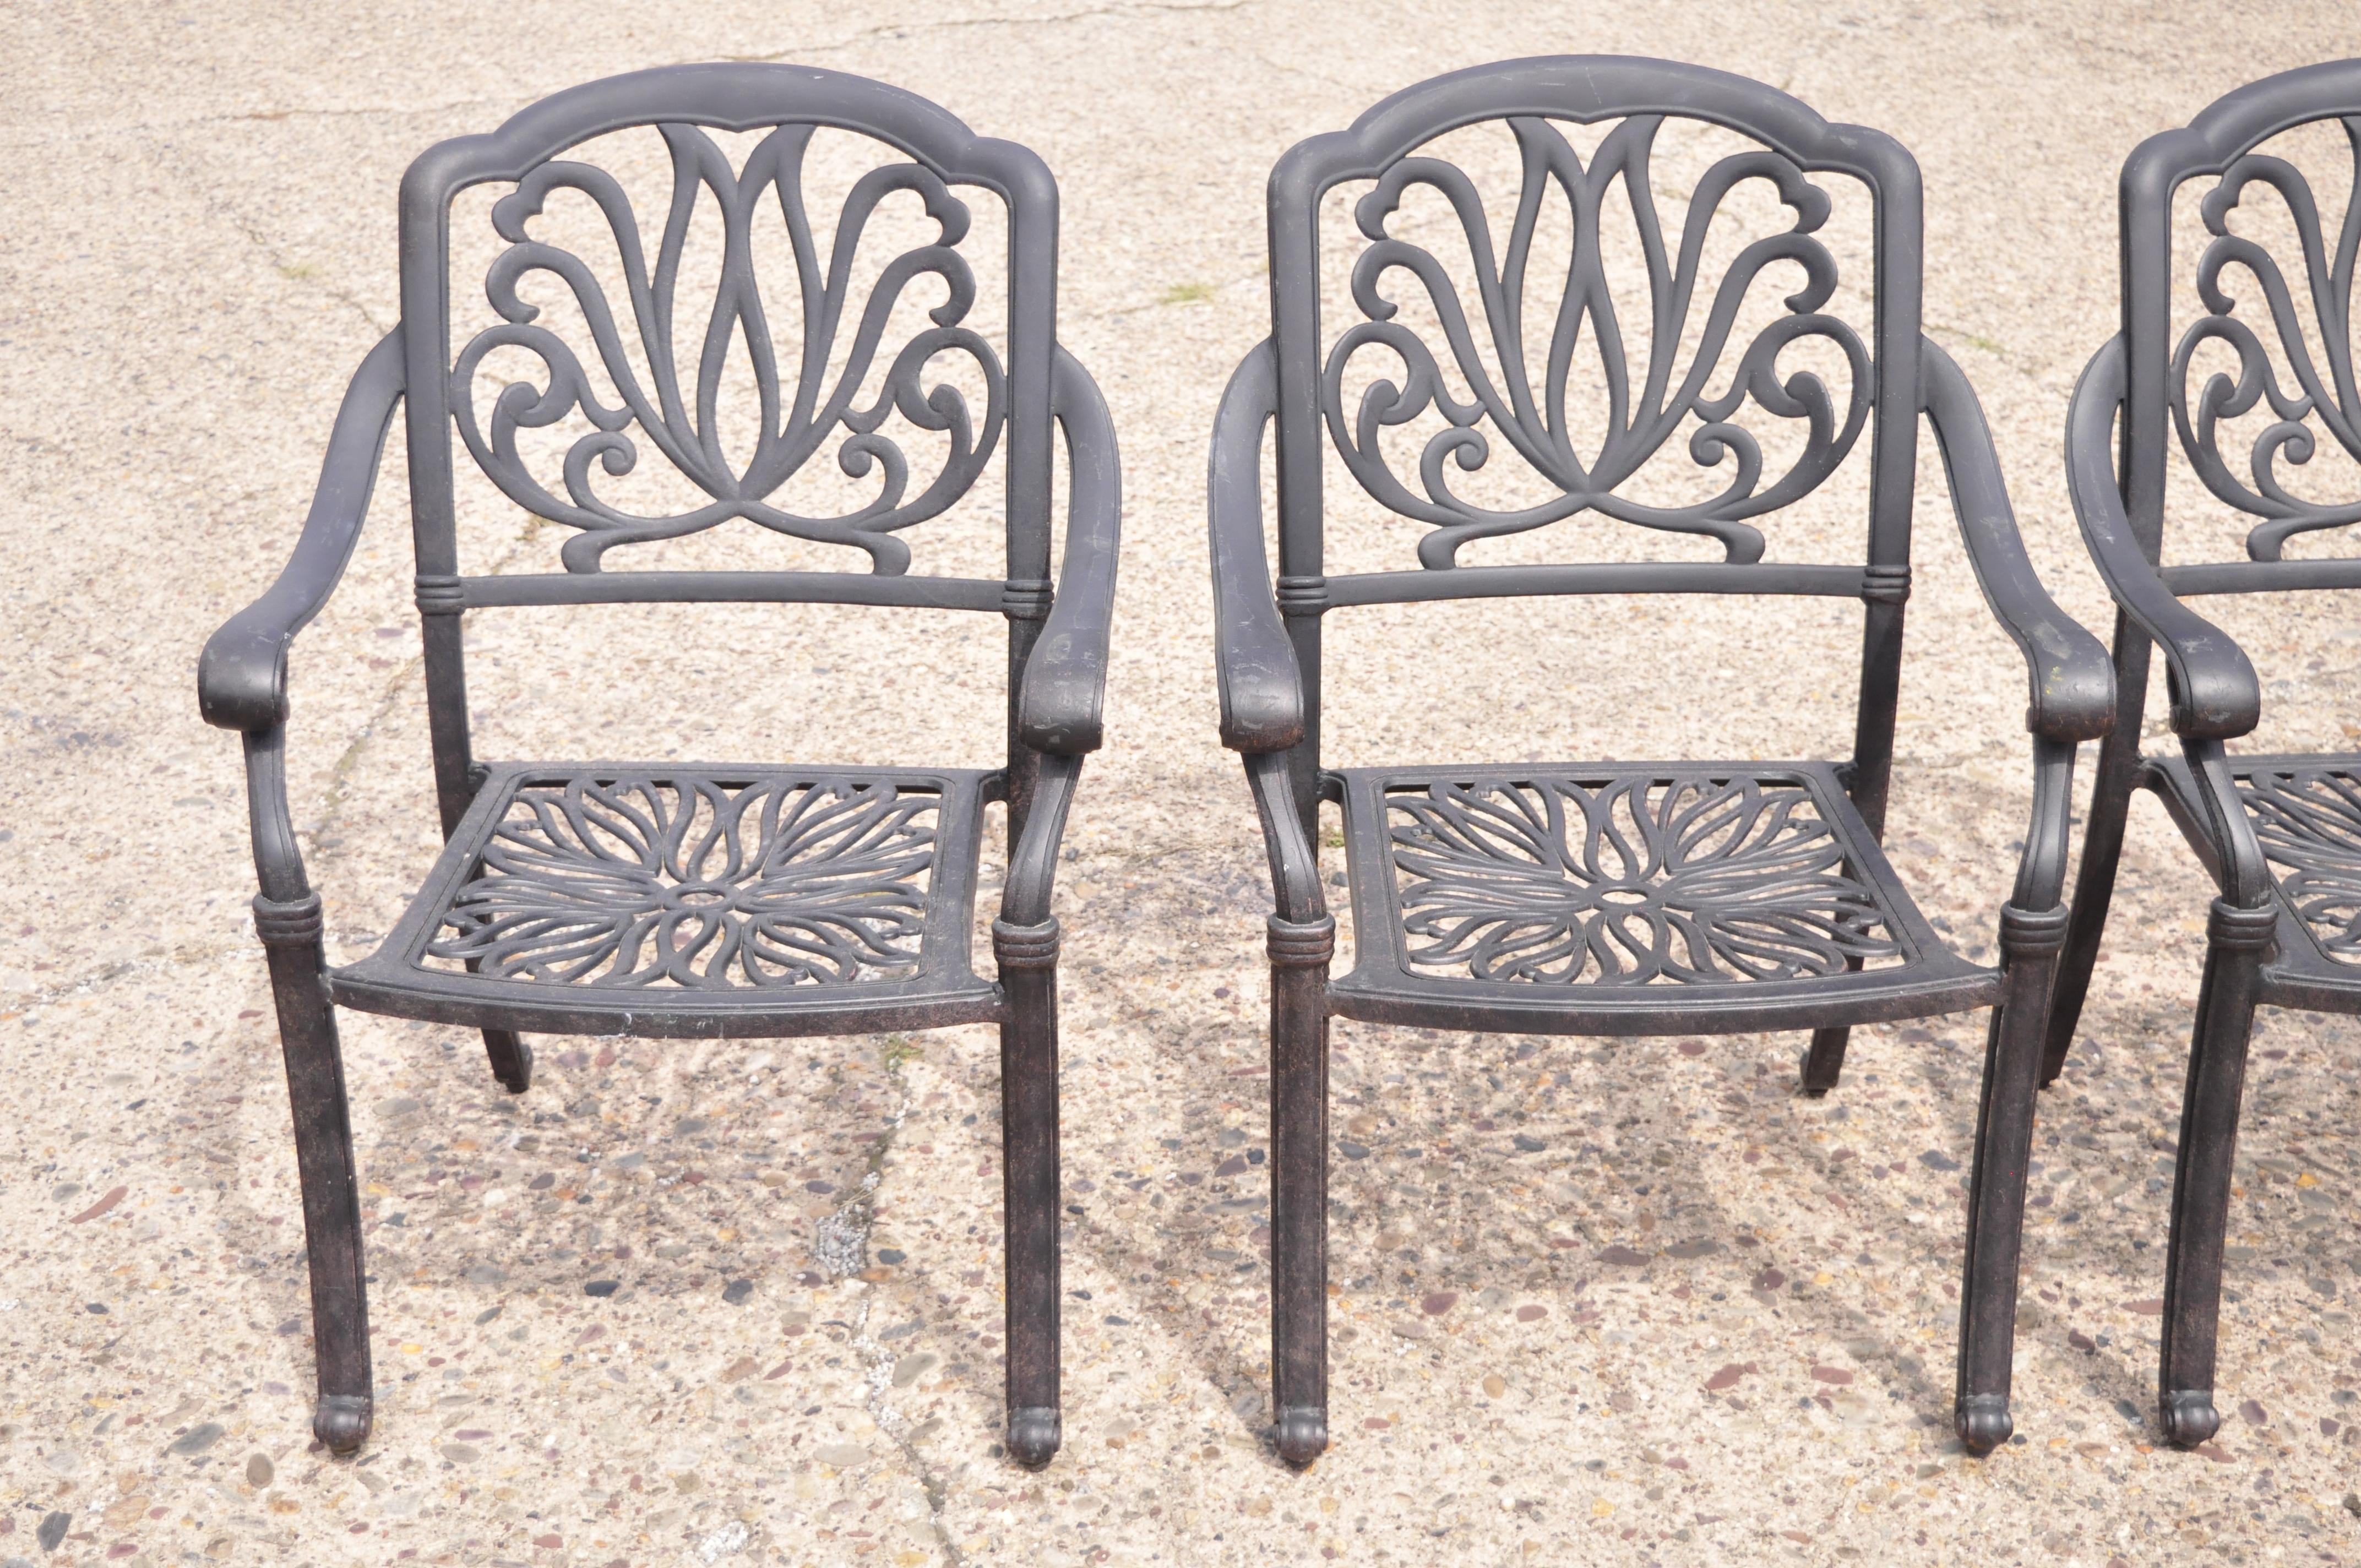 Spanish Colonial KB Patio Elizabeth Collection Aluminum Garden Patio Dining Arm Chairs - Set of 6 For Sale